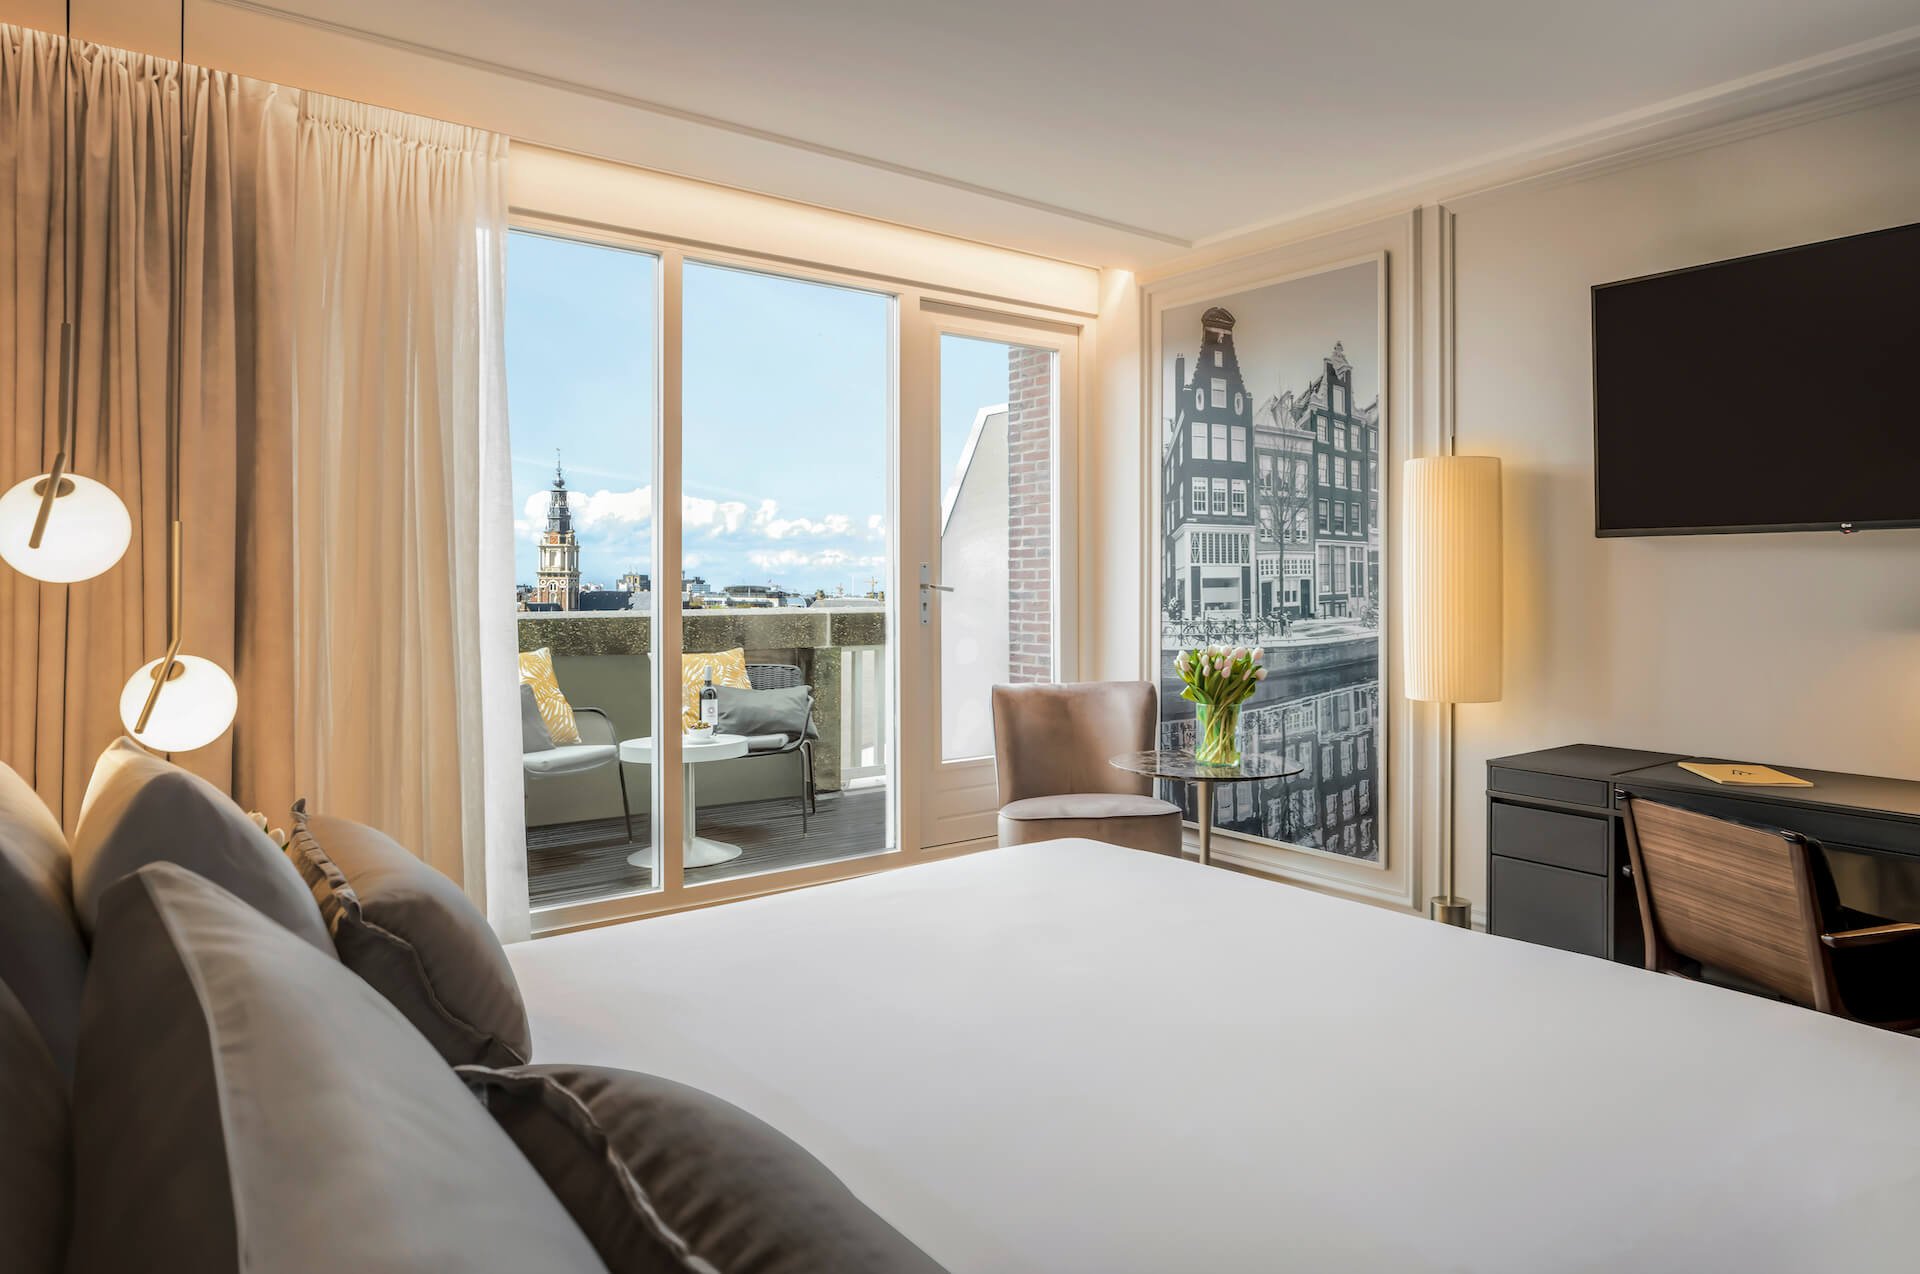 Anantara_Grand_Hotel_Krasnapolsky_Amsterdam_guest_room_Deluxe_with_rooftop_view_and_terrace_2.jpg